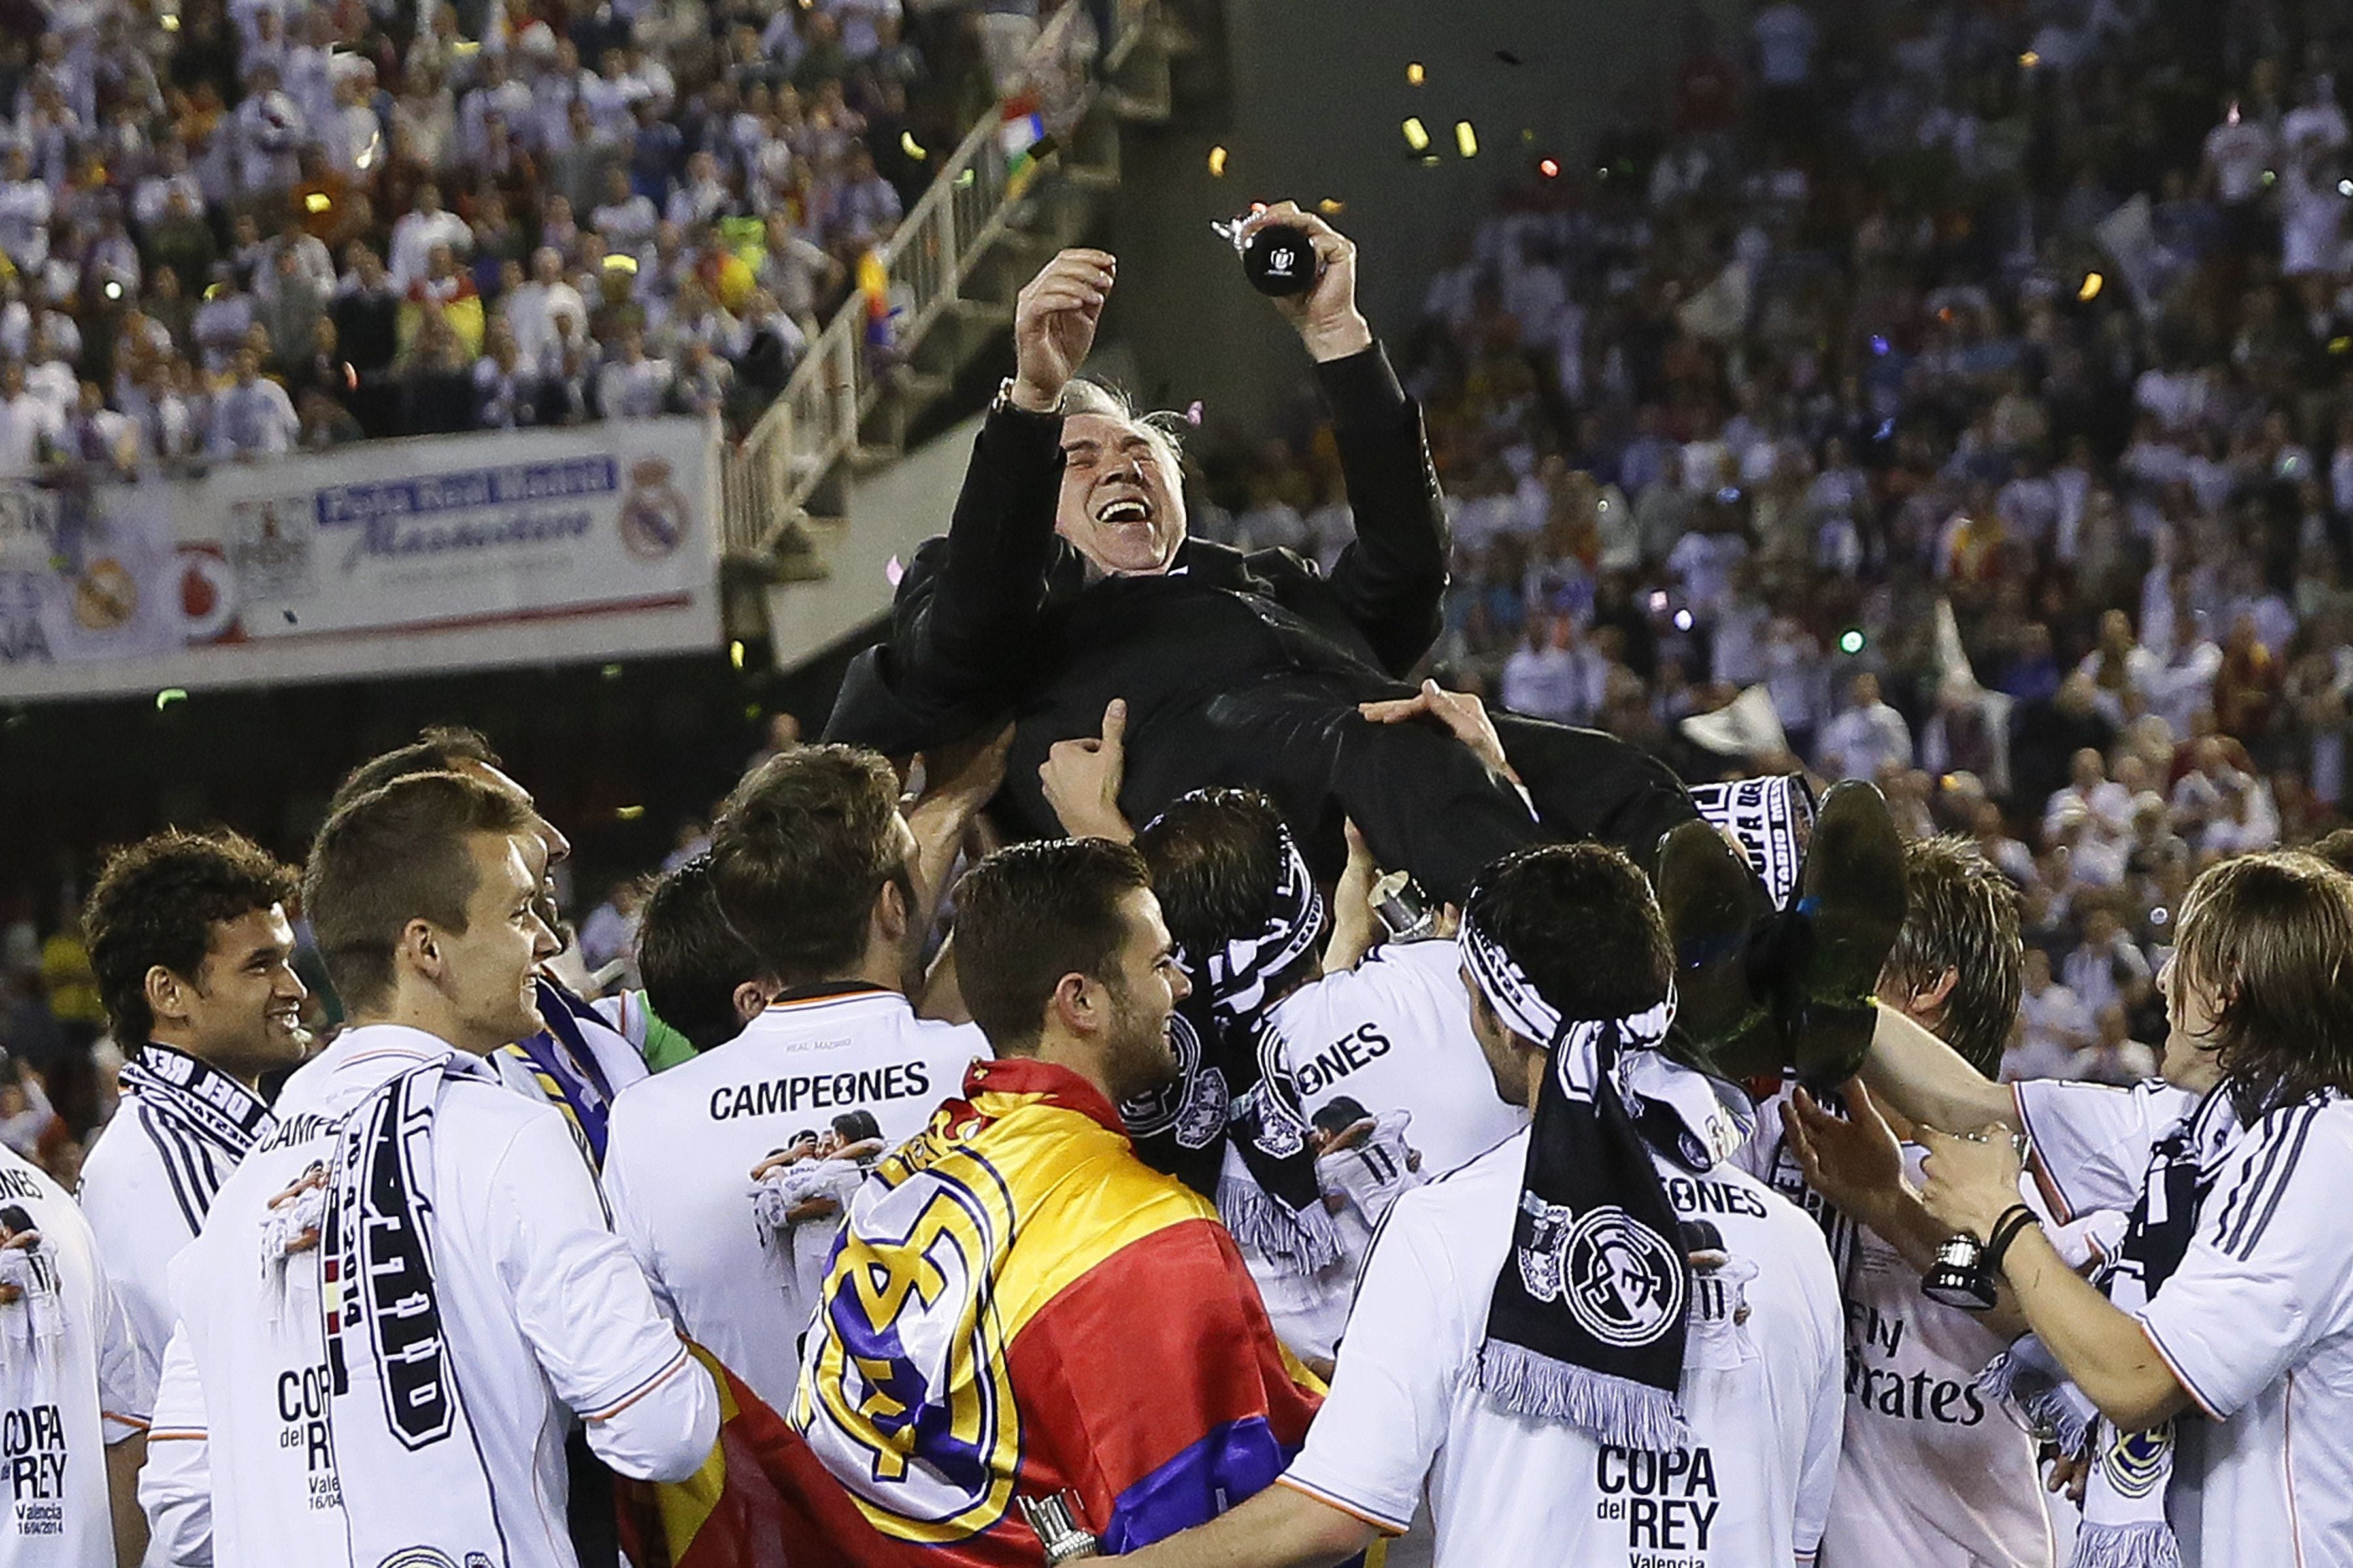 Real Madrid's Italian coach Carlo Ancelotti is tossed by his players after winning the Spanish Copa del Rey (King's Cup) final "Clasico" football match FC Barcelona vs Real Madrid CF at the Mestalla stadium in Valencia on April 16, 2014. Real Madrid won the match 2-1.  AFP PHOTO / CESAR MANSO